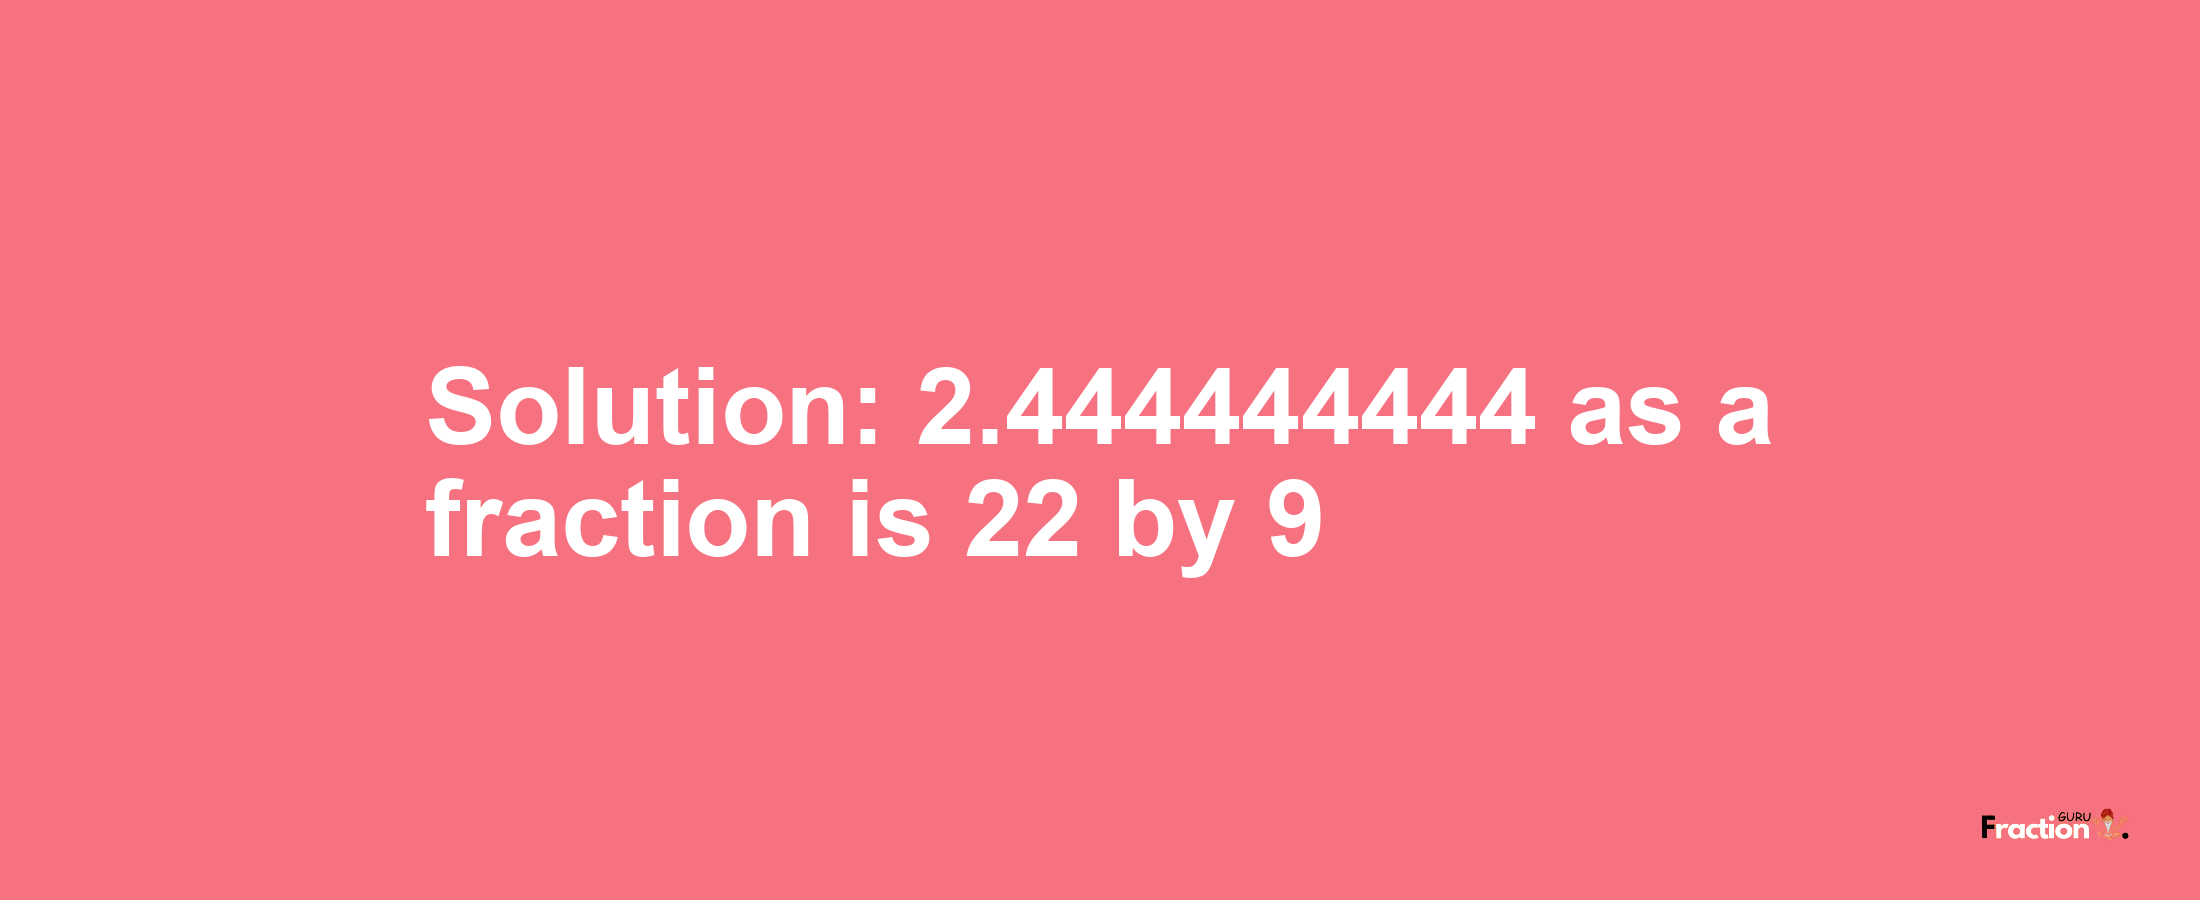 Solution:2.444444444 as a fraction is 22/9